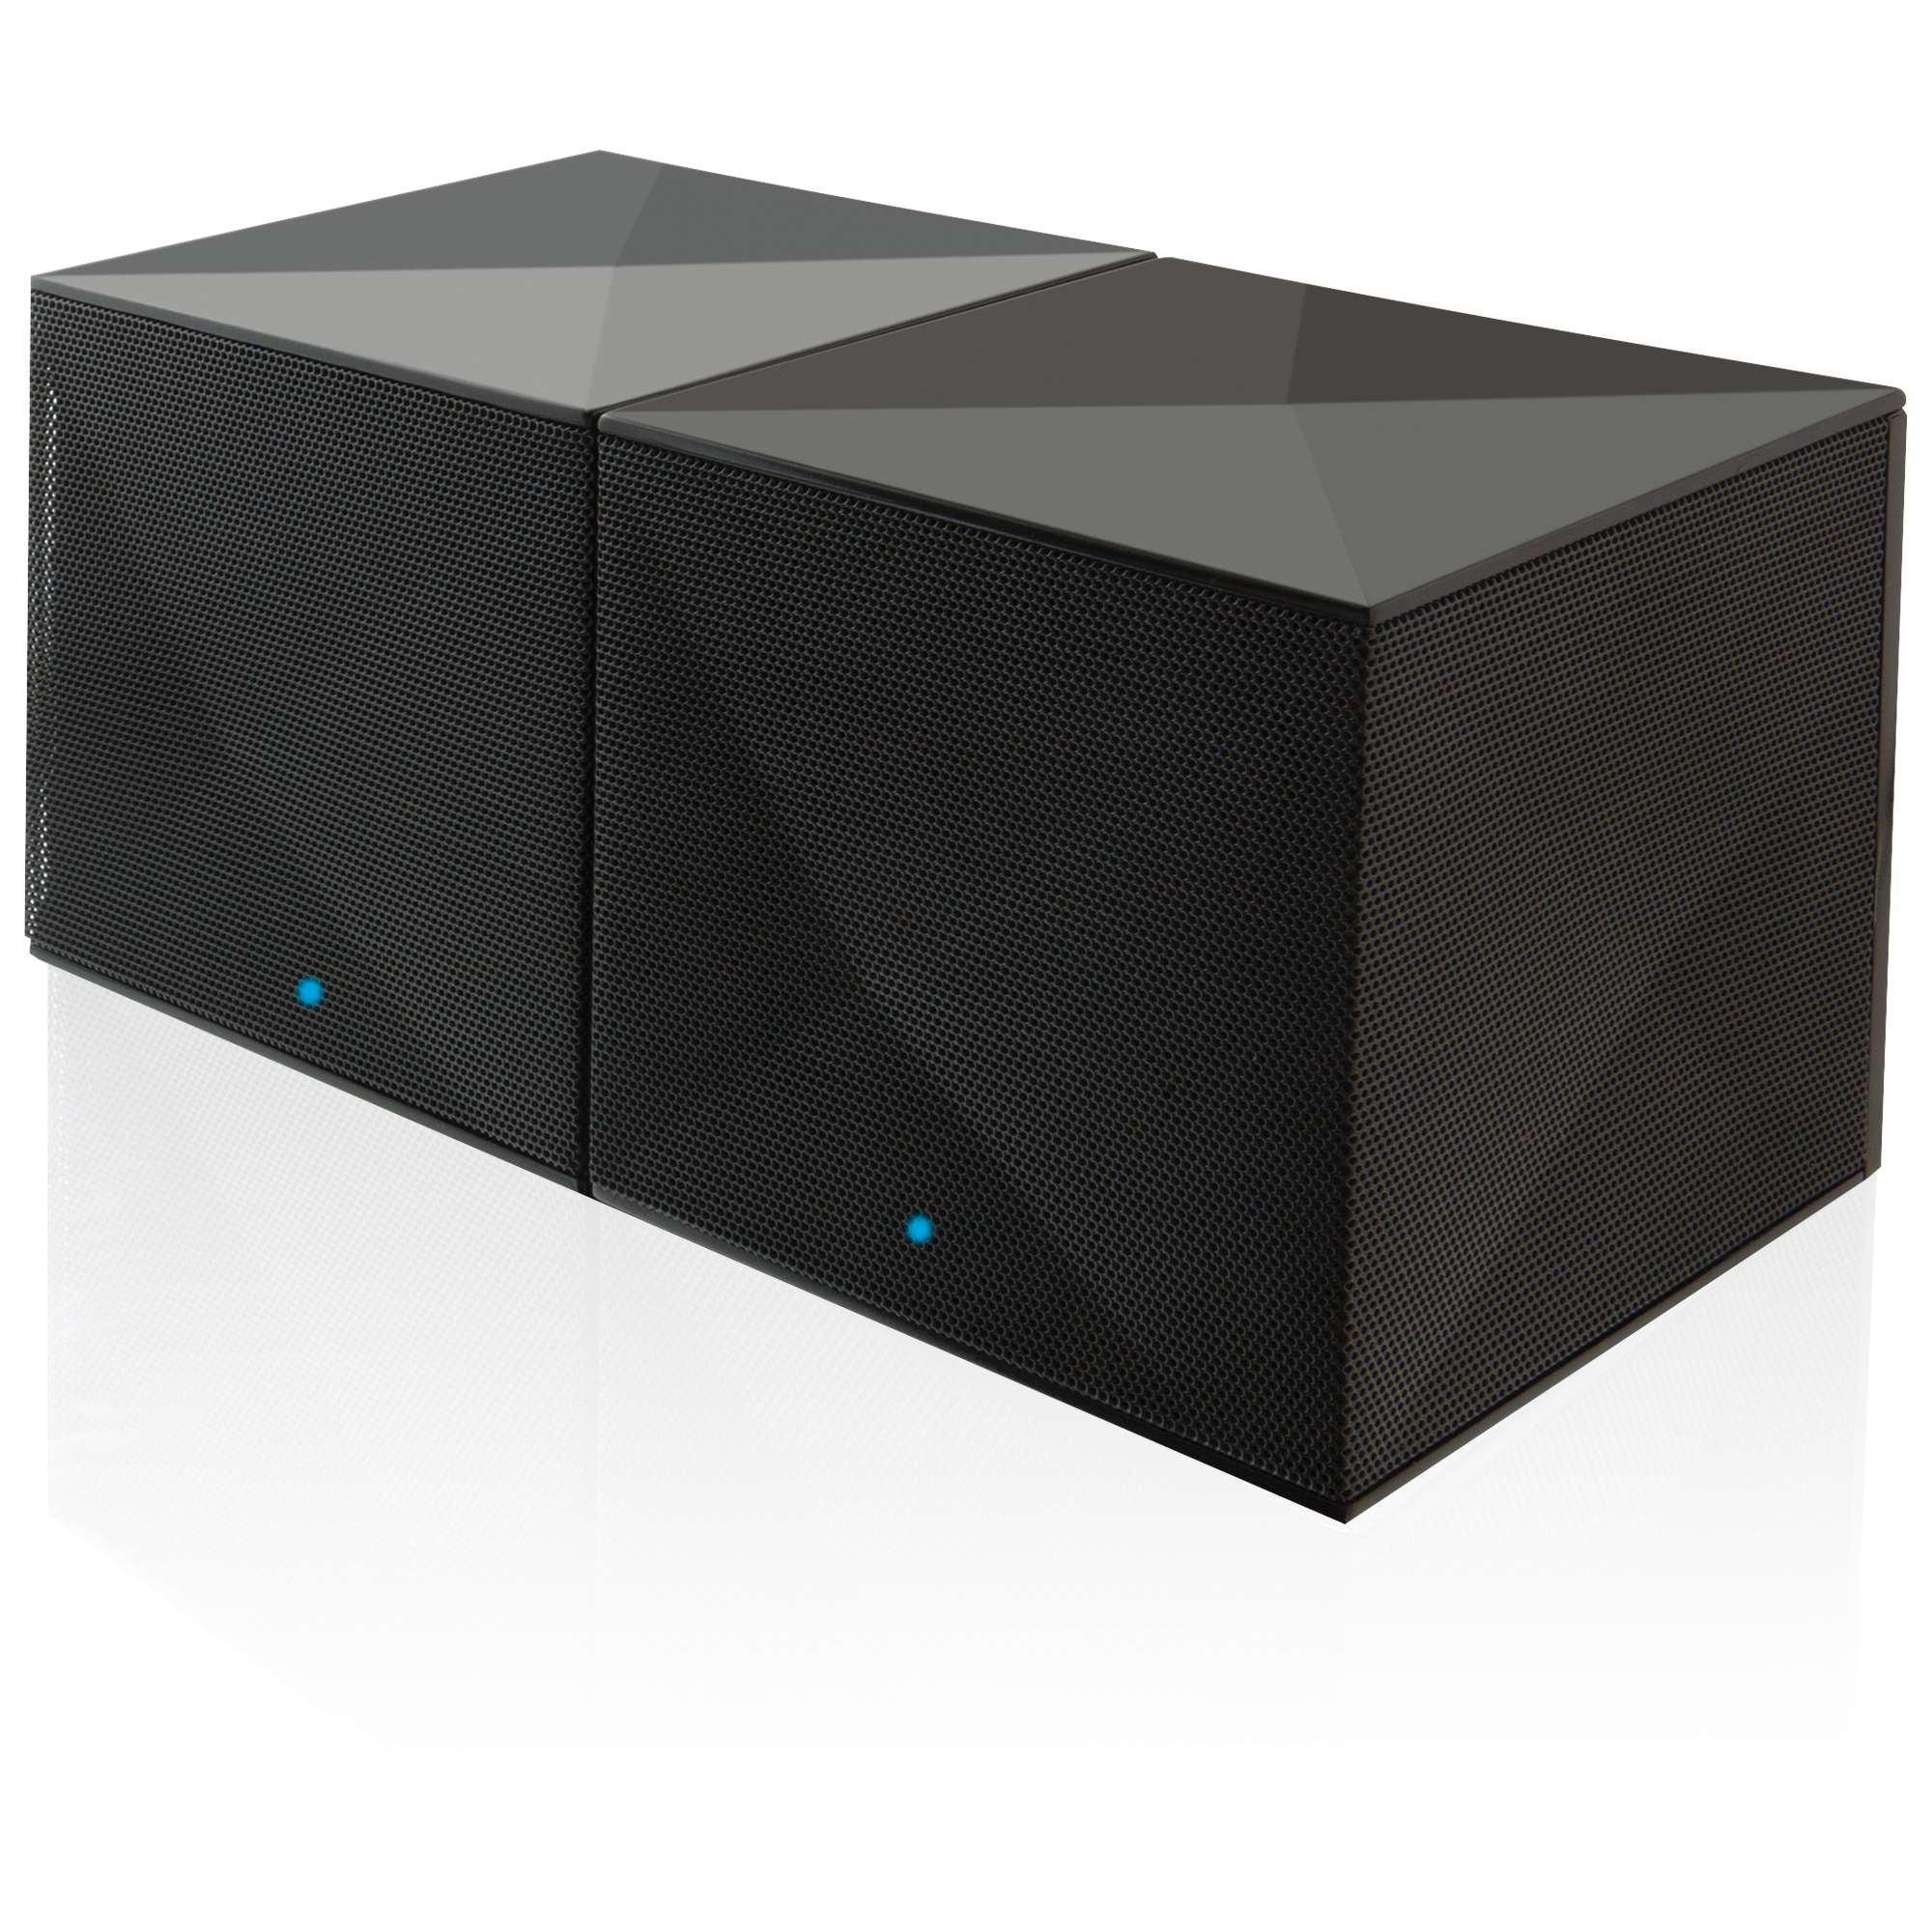 iLive v2.1 Bluetooth Wireless Speakers with Charging Station, ISB614B, Black - image 3 of 6